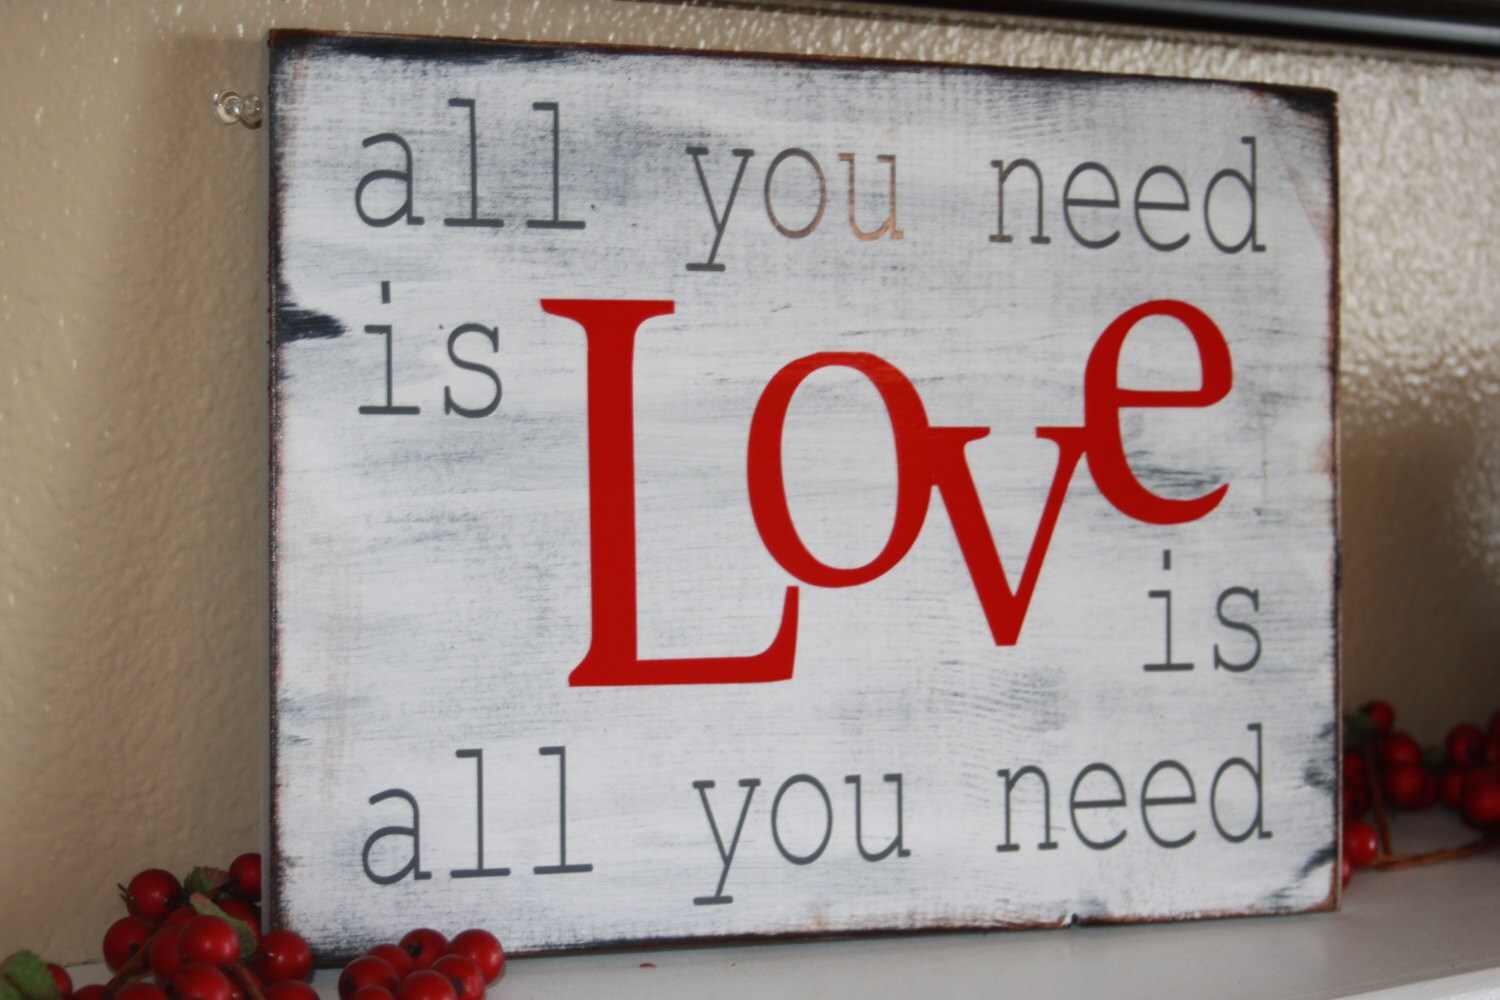 All you need is Love is all you need. Home decor by invinyl